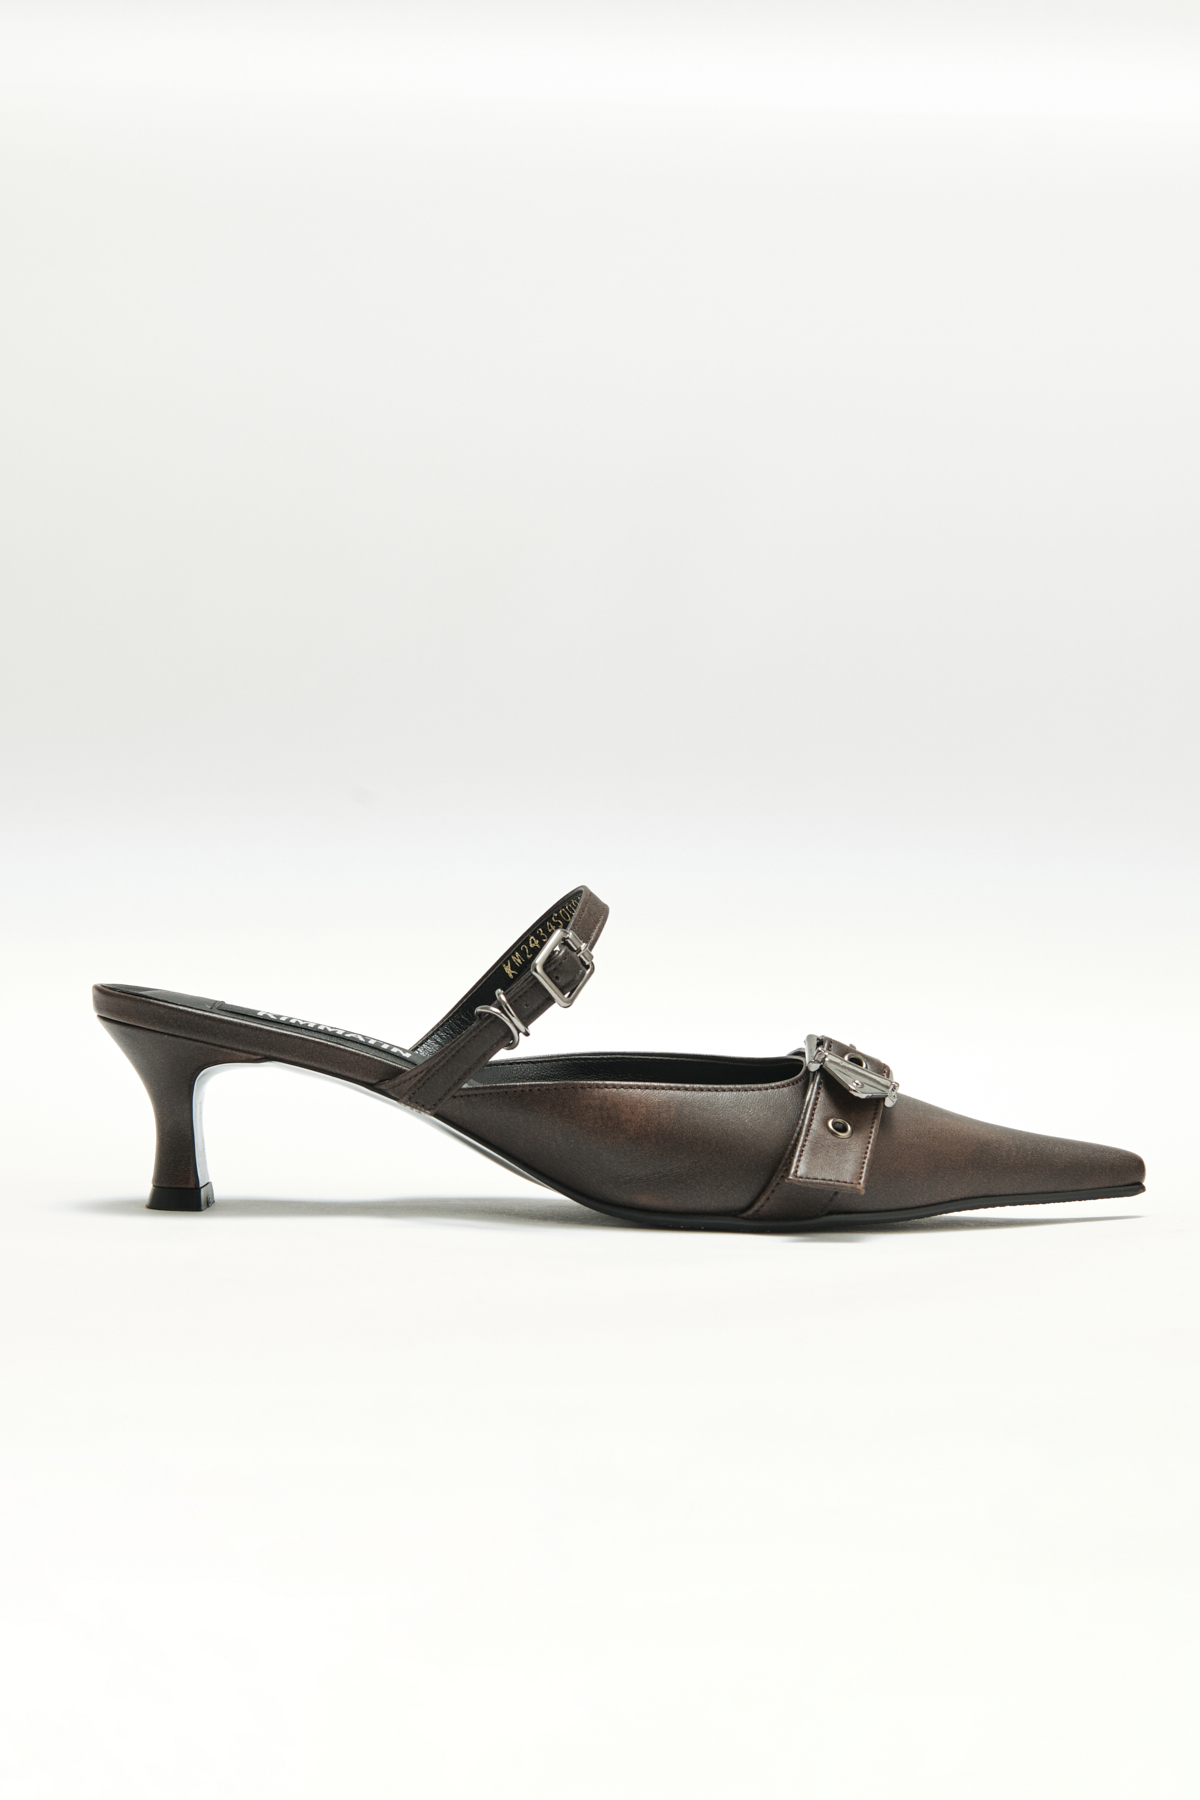 BELTED STILETTO MULE IN BROWN